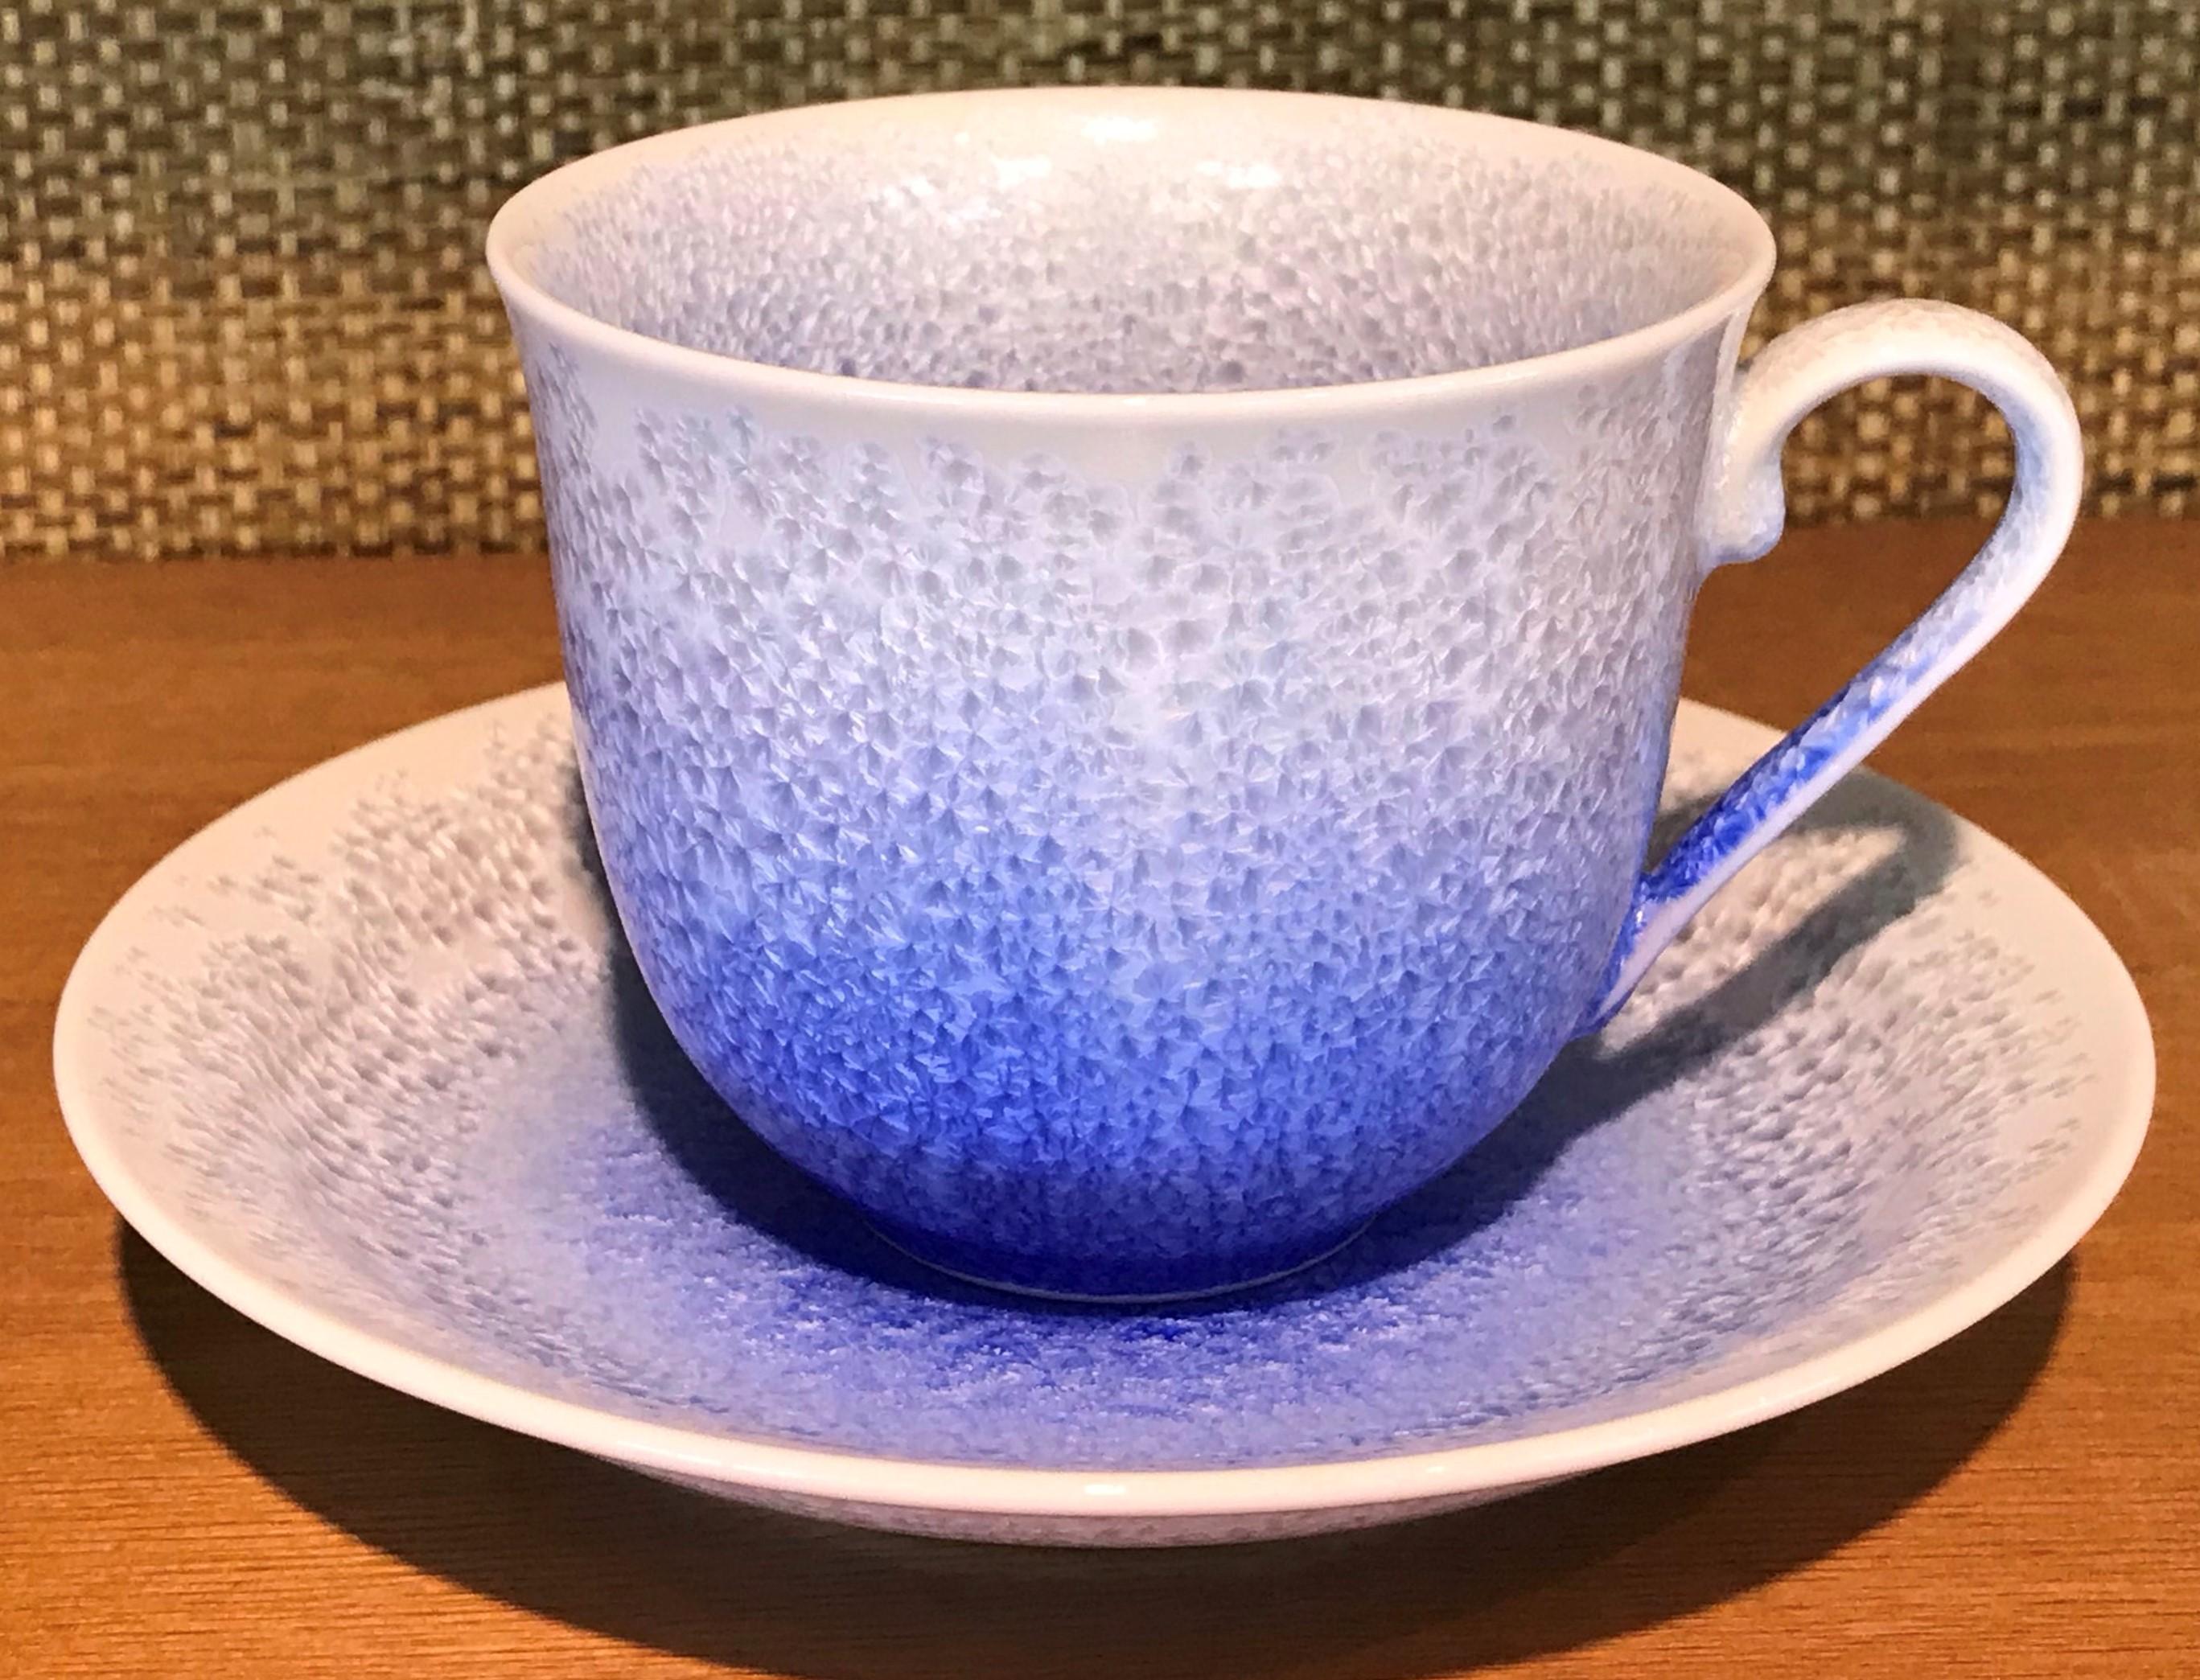 Contemporary Japanese Hand-Glazed Blue White Porcelain Cup and Saucer by Master Artist